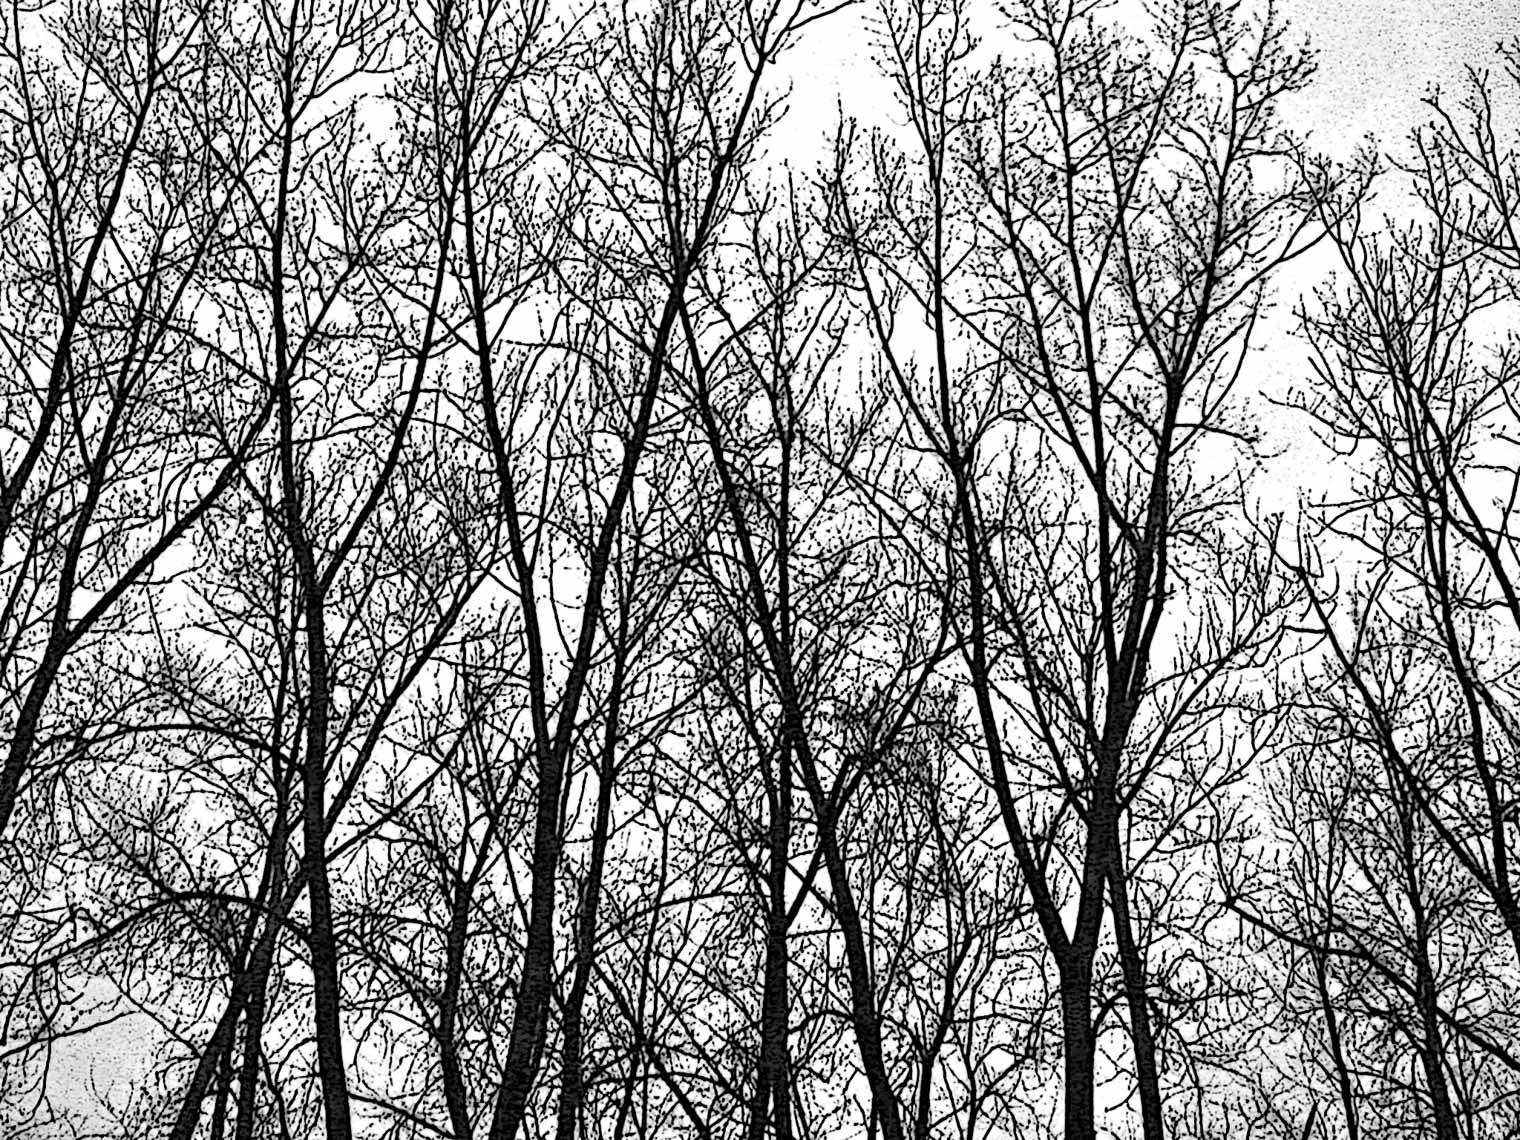 TreesEdgePosterizedBW12-04-04005-after